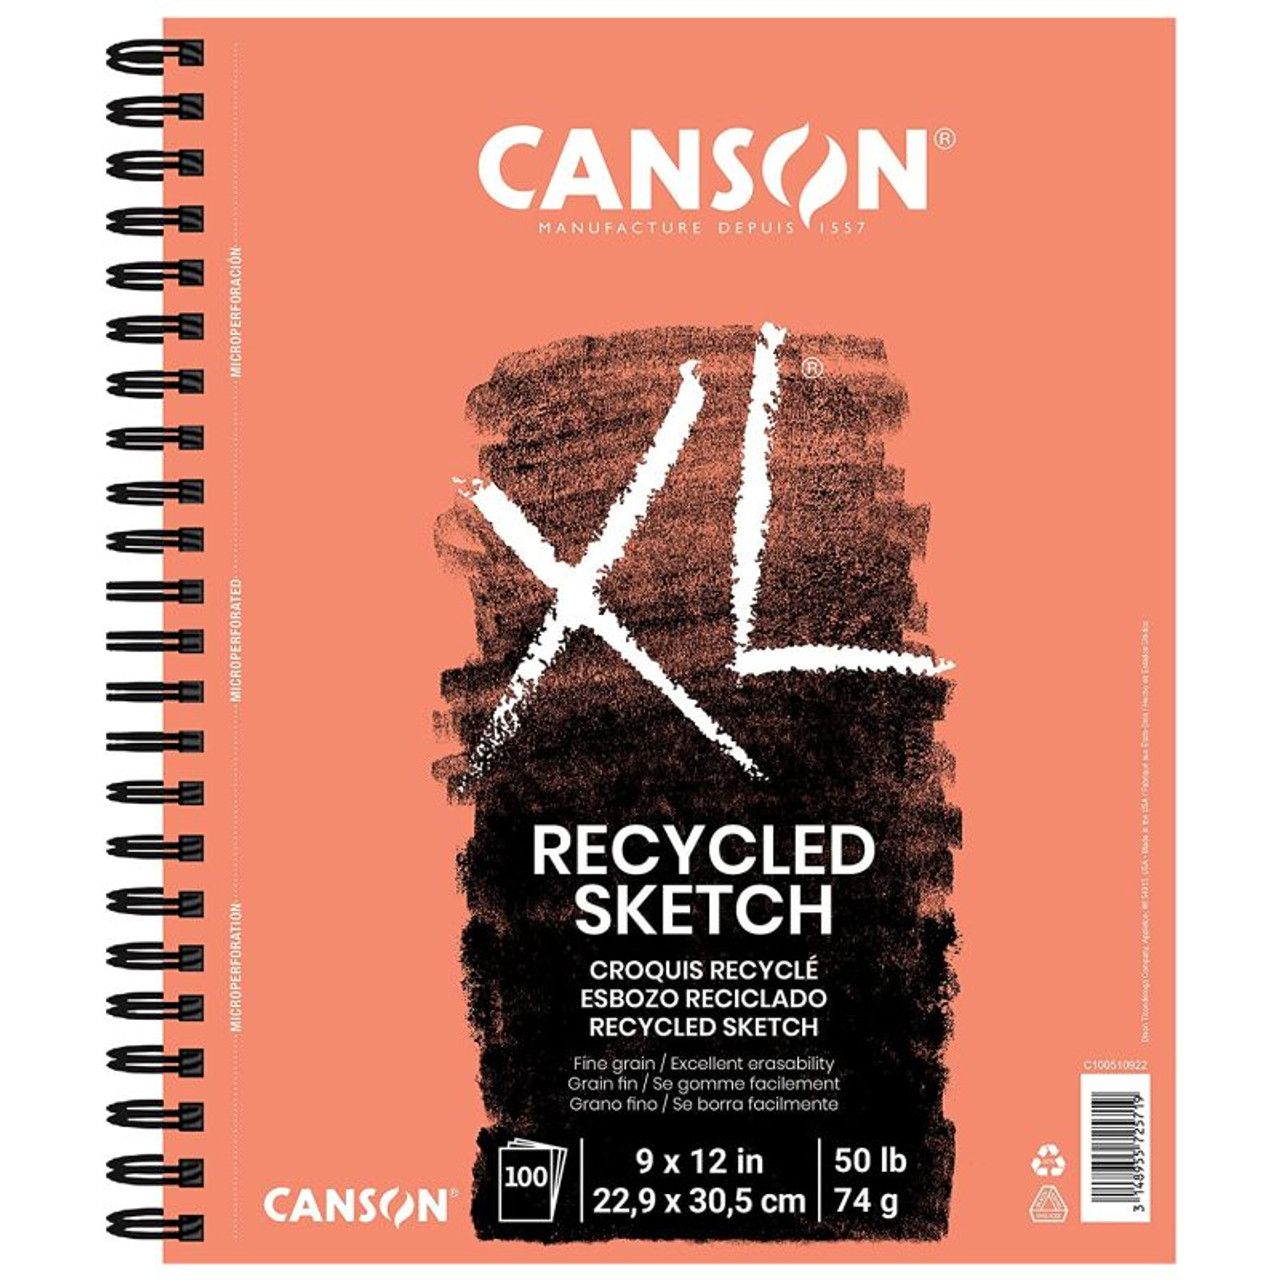 Canson XL Recycled Sketch Pad, 9 x 12 - FLAX art & design